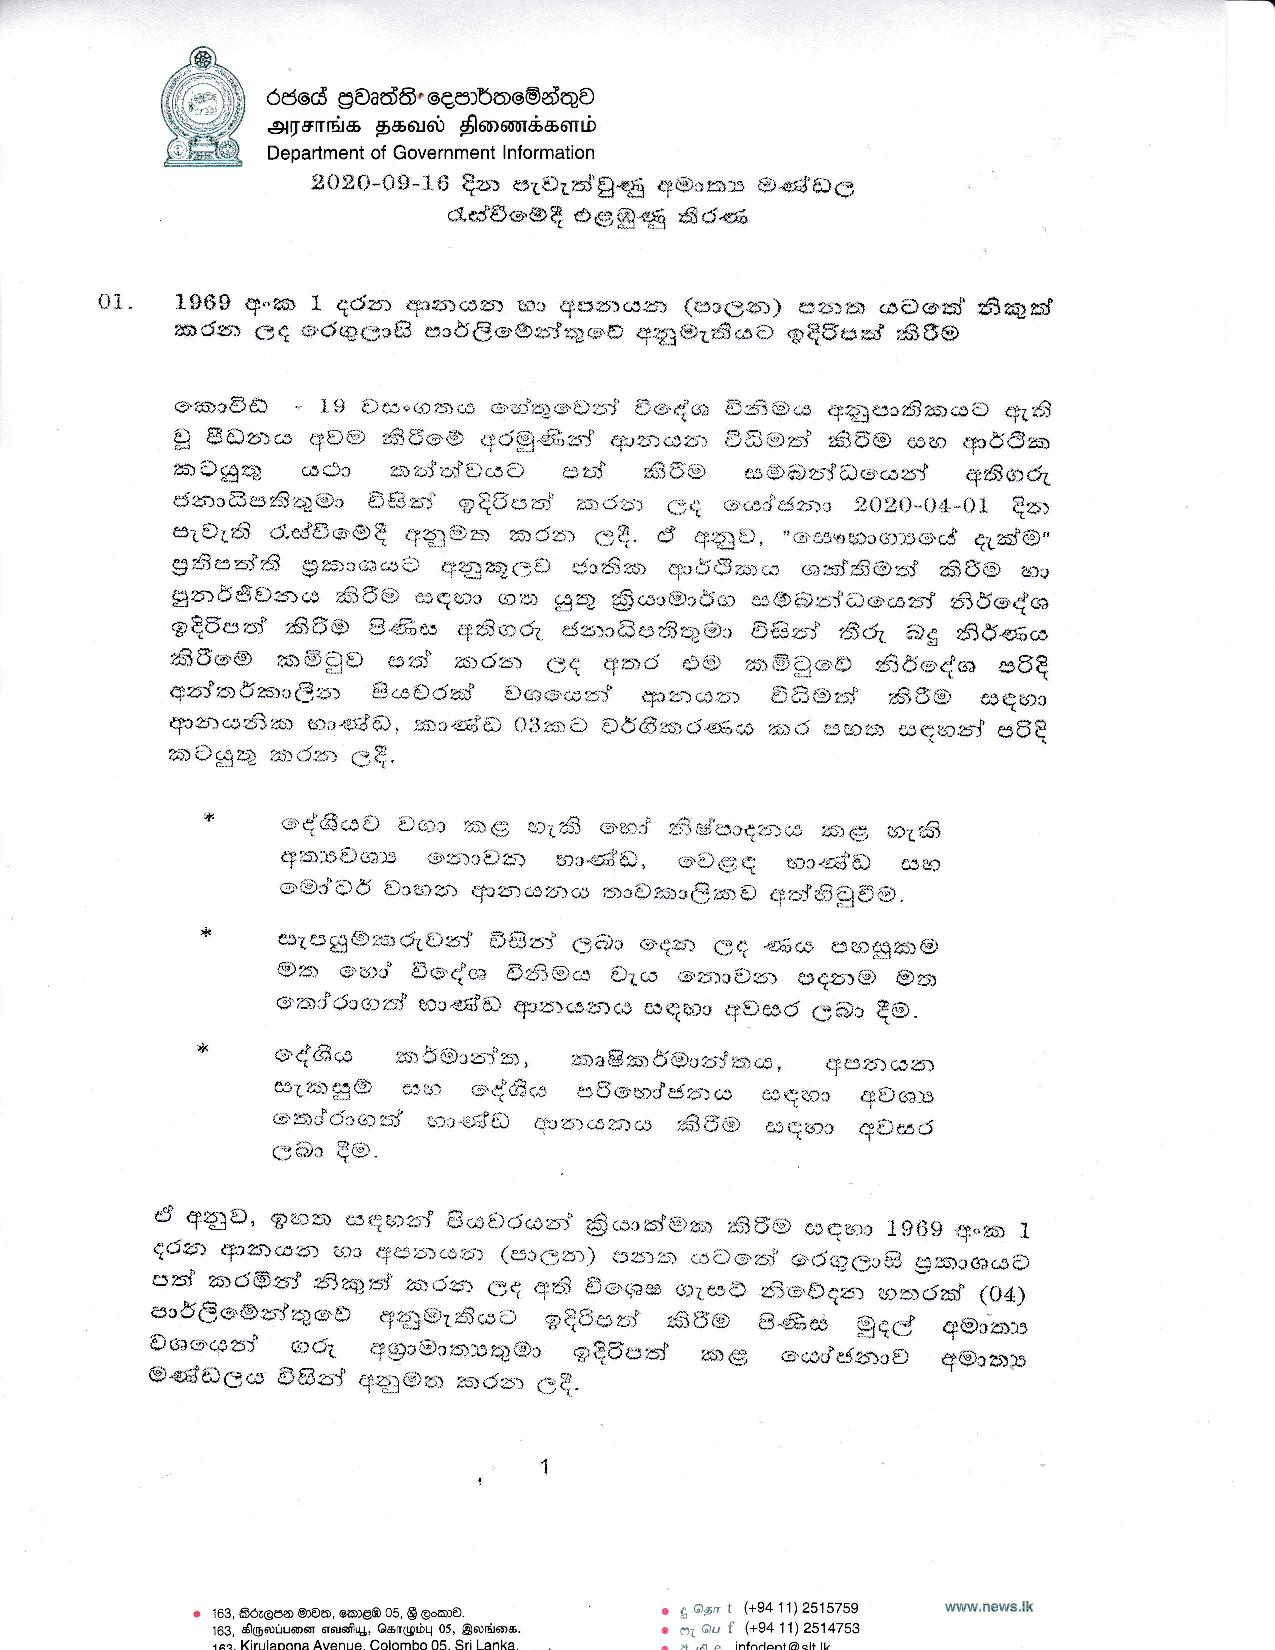 Cabinet Decision on 16.09.2020 page 001